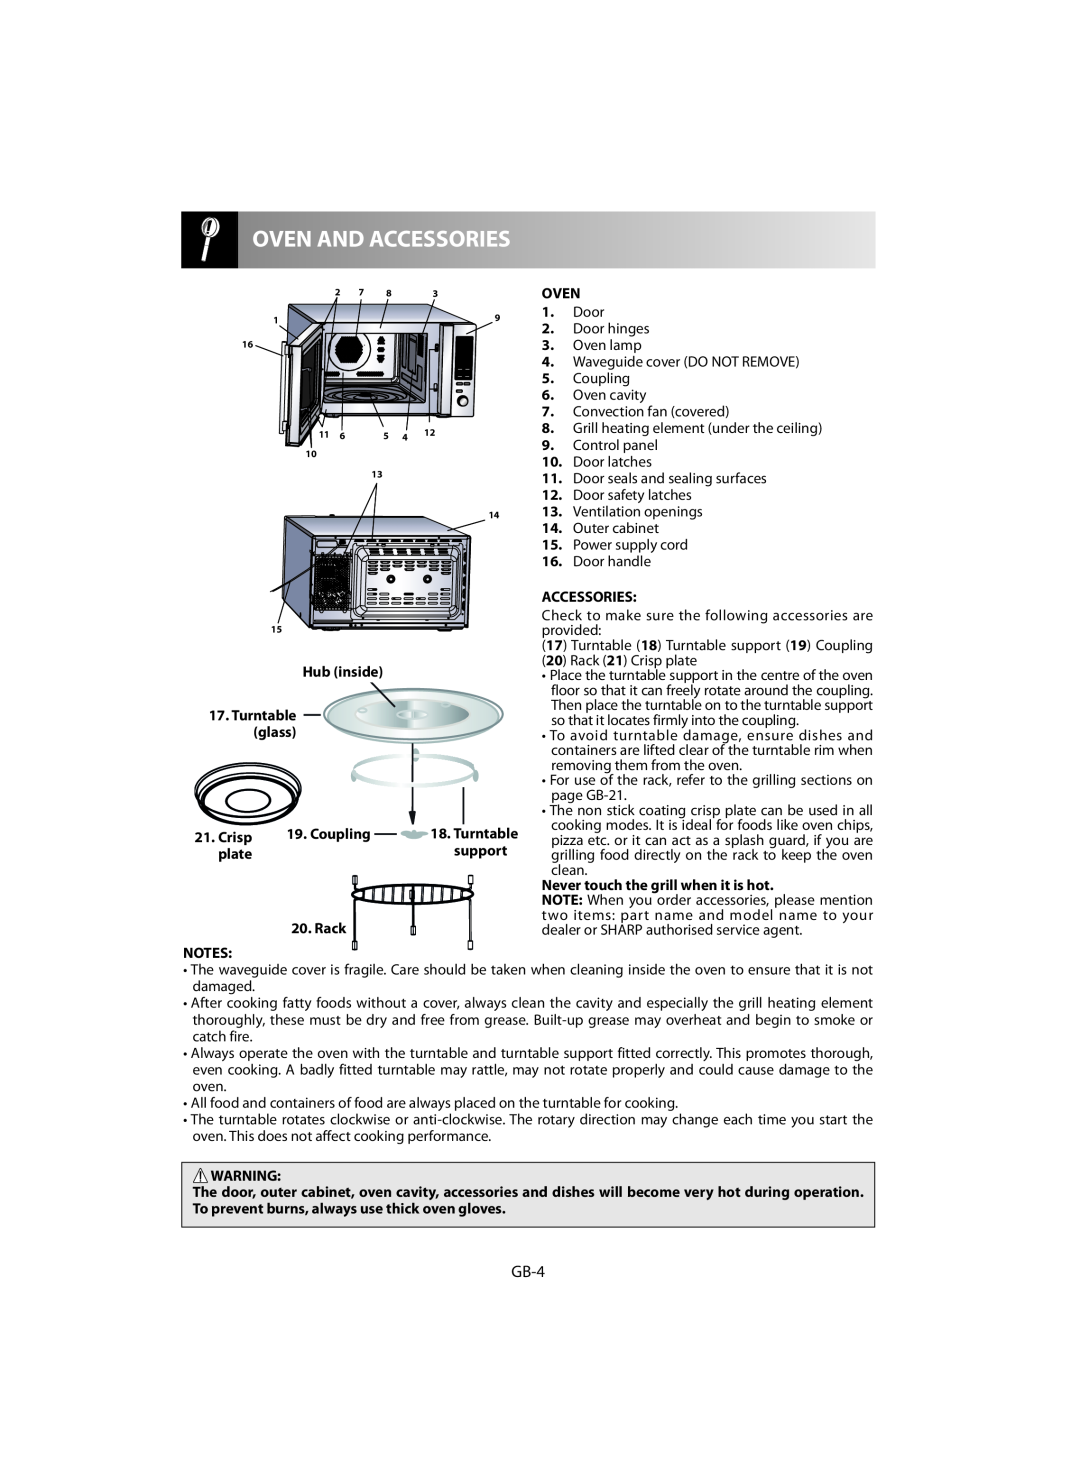 Sharp R-92STM operation manual GB-4, Hub inside 17. Turntable glass, plate, support, Rack, Oven, Accessories 